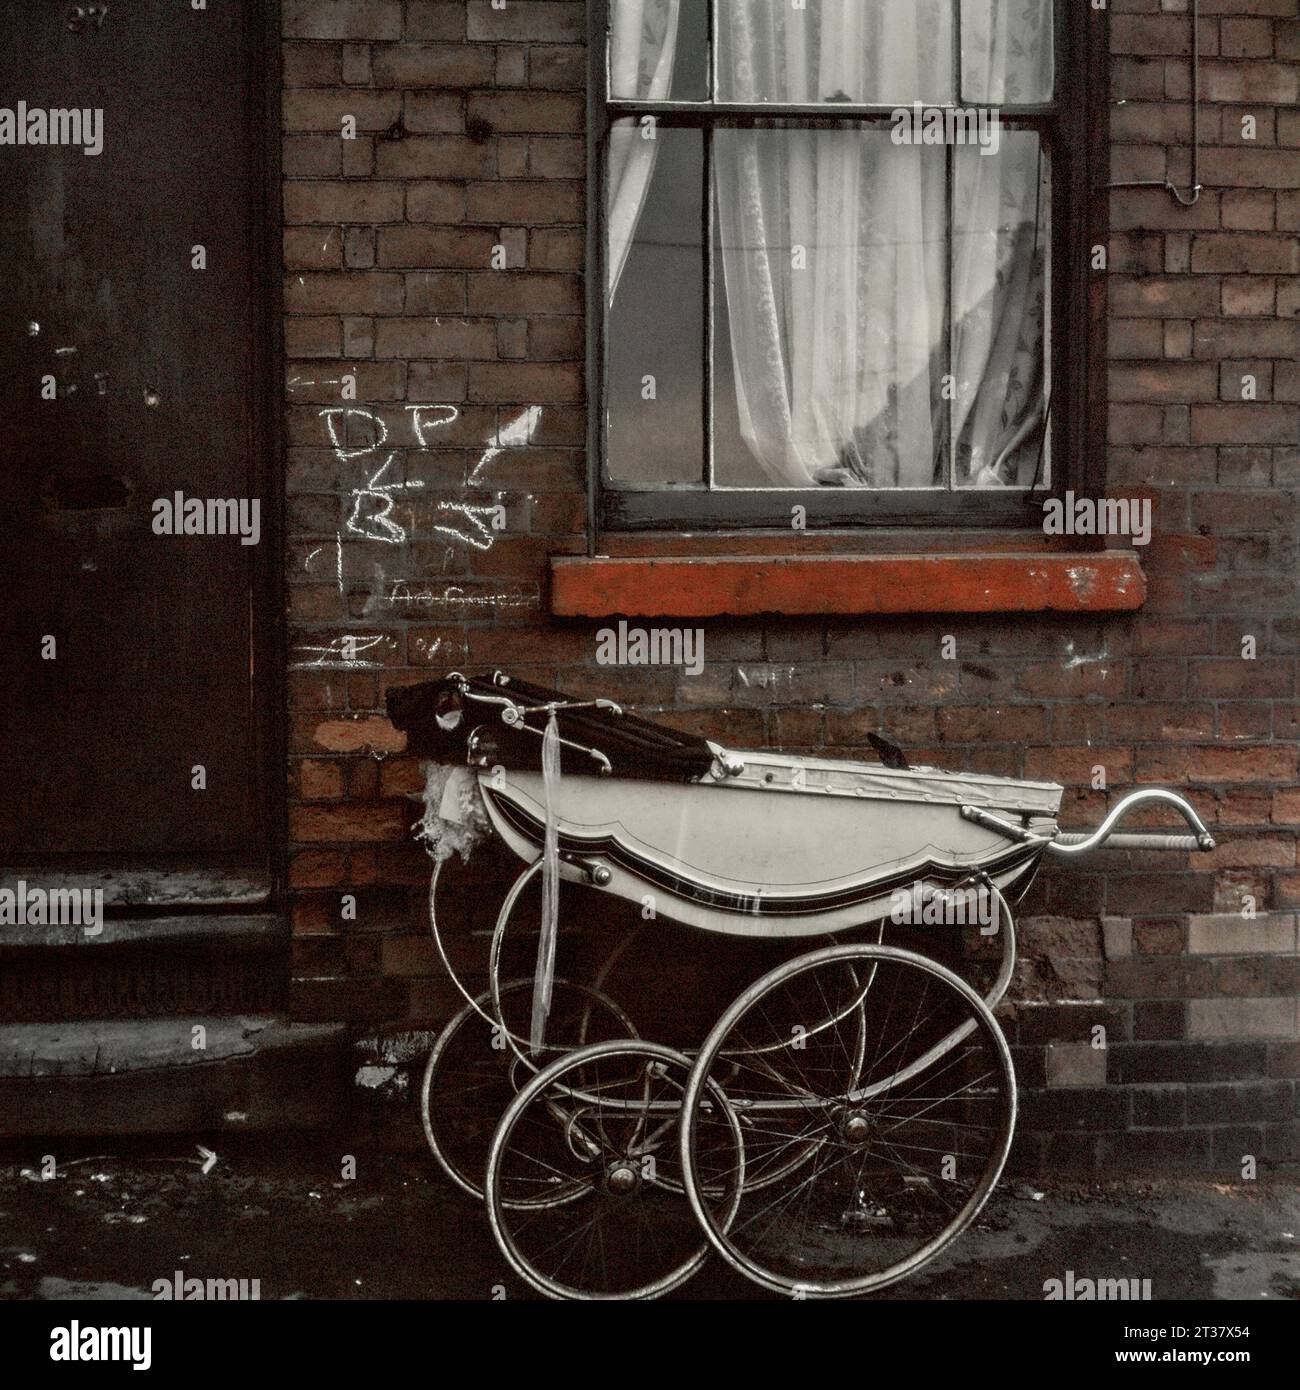 97 Pym Street with a Silver Cross pram parked outside the front door during the slum clearance and demolition of St Ann's, Nottingham. 1969-1972 Stock Photo